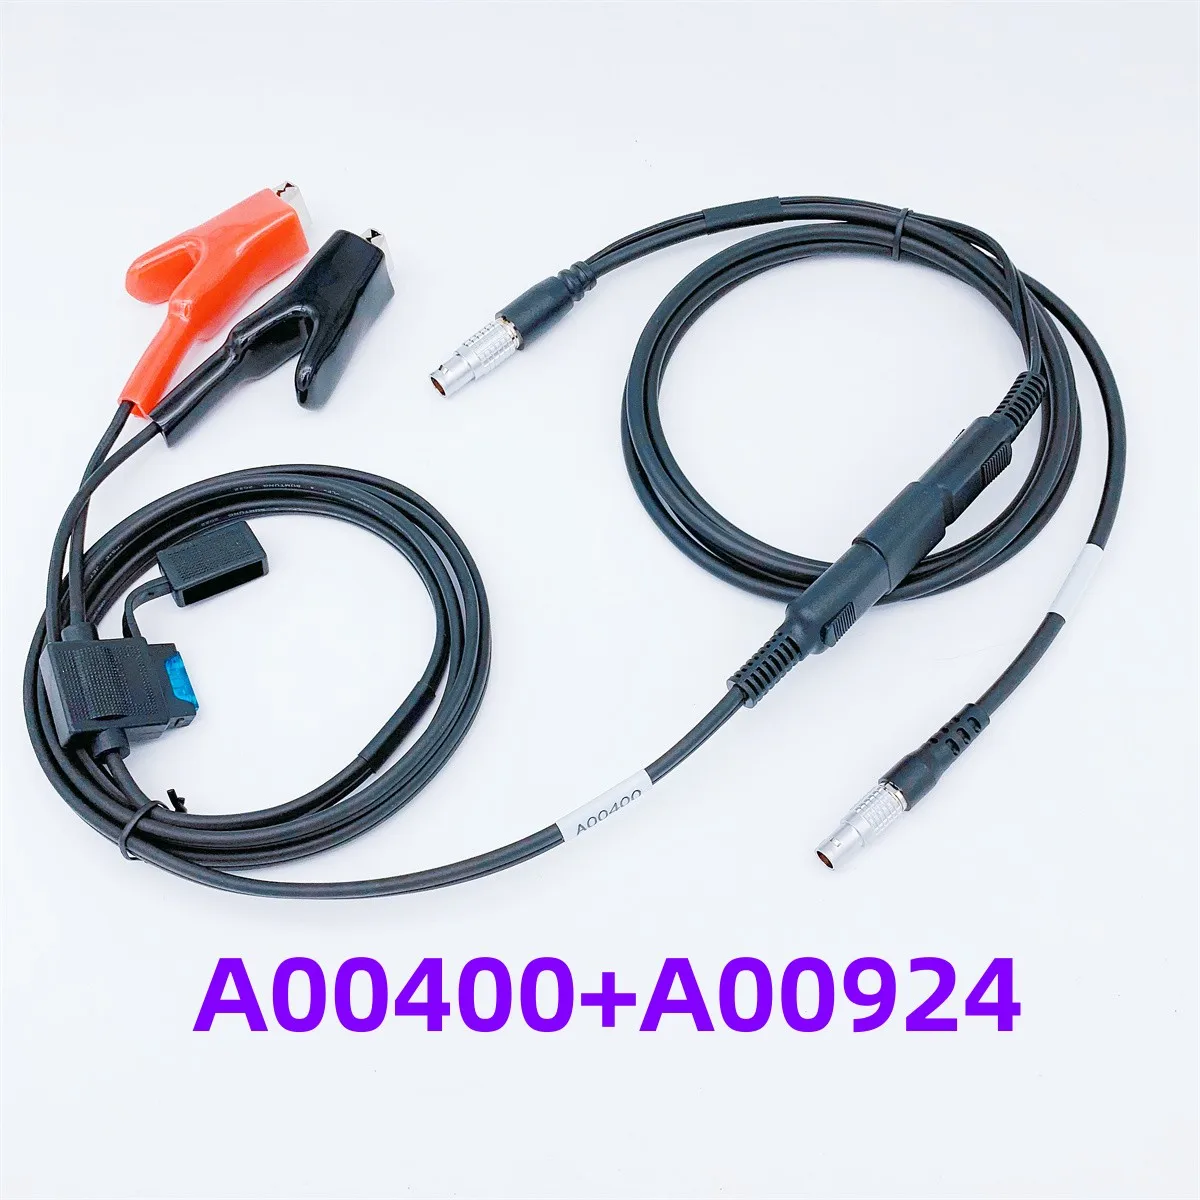 

Brand NEW A00924 & A00400 Cable for Trimble 4700 4800 5700 R4 R5 R6 R8 R10 GPS GNSS Receivers to Pacific Crest PDL HPB HPB450